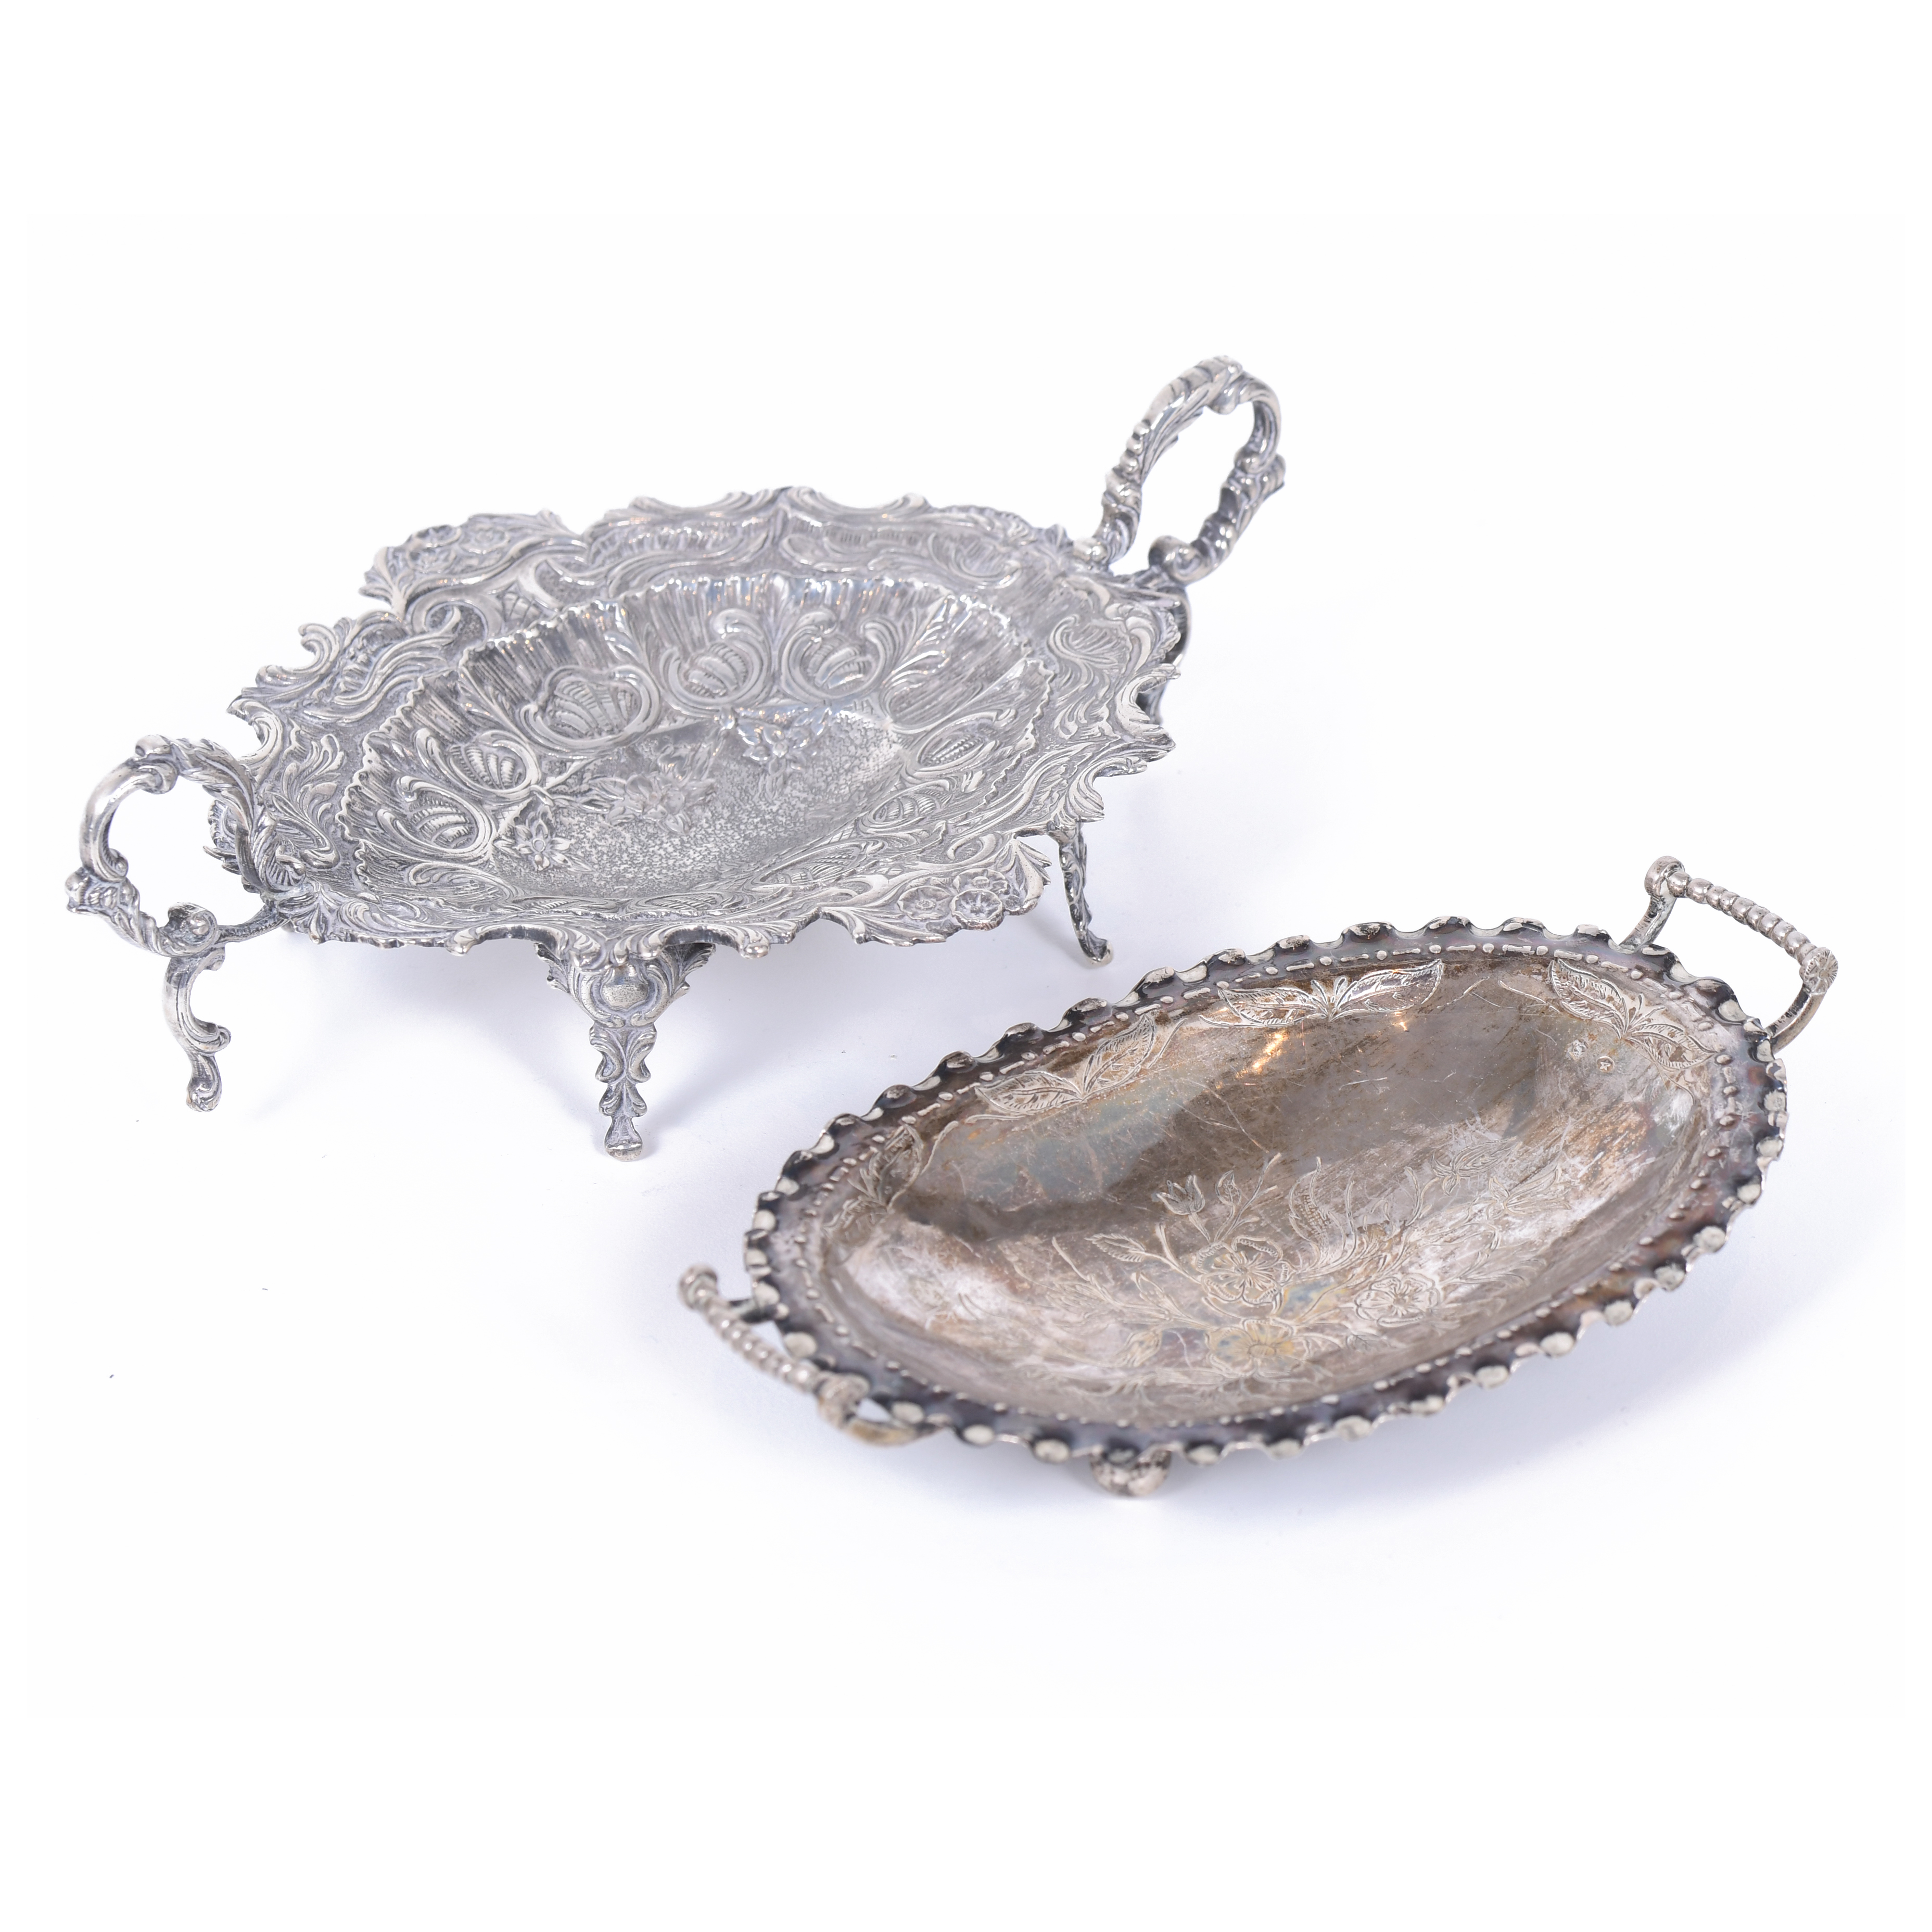 PAIR OF VICTORIAN STYLE SNACK TRAYS IN SILVER, 20TH CENTURY